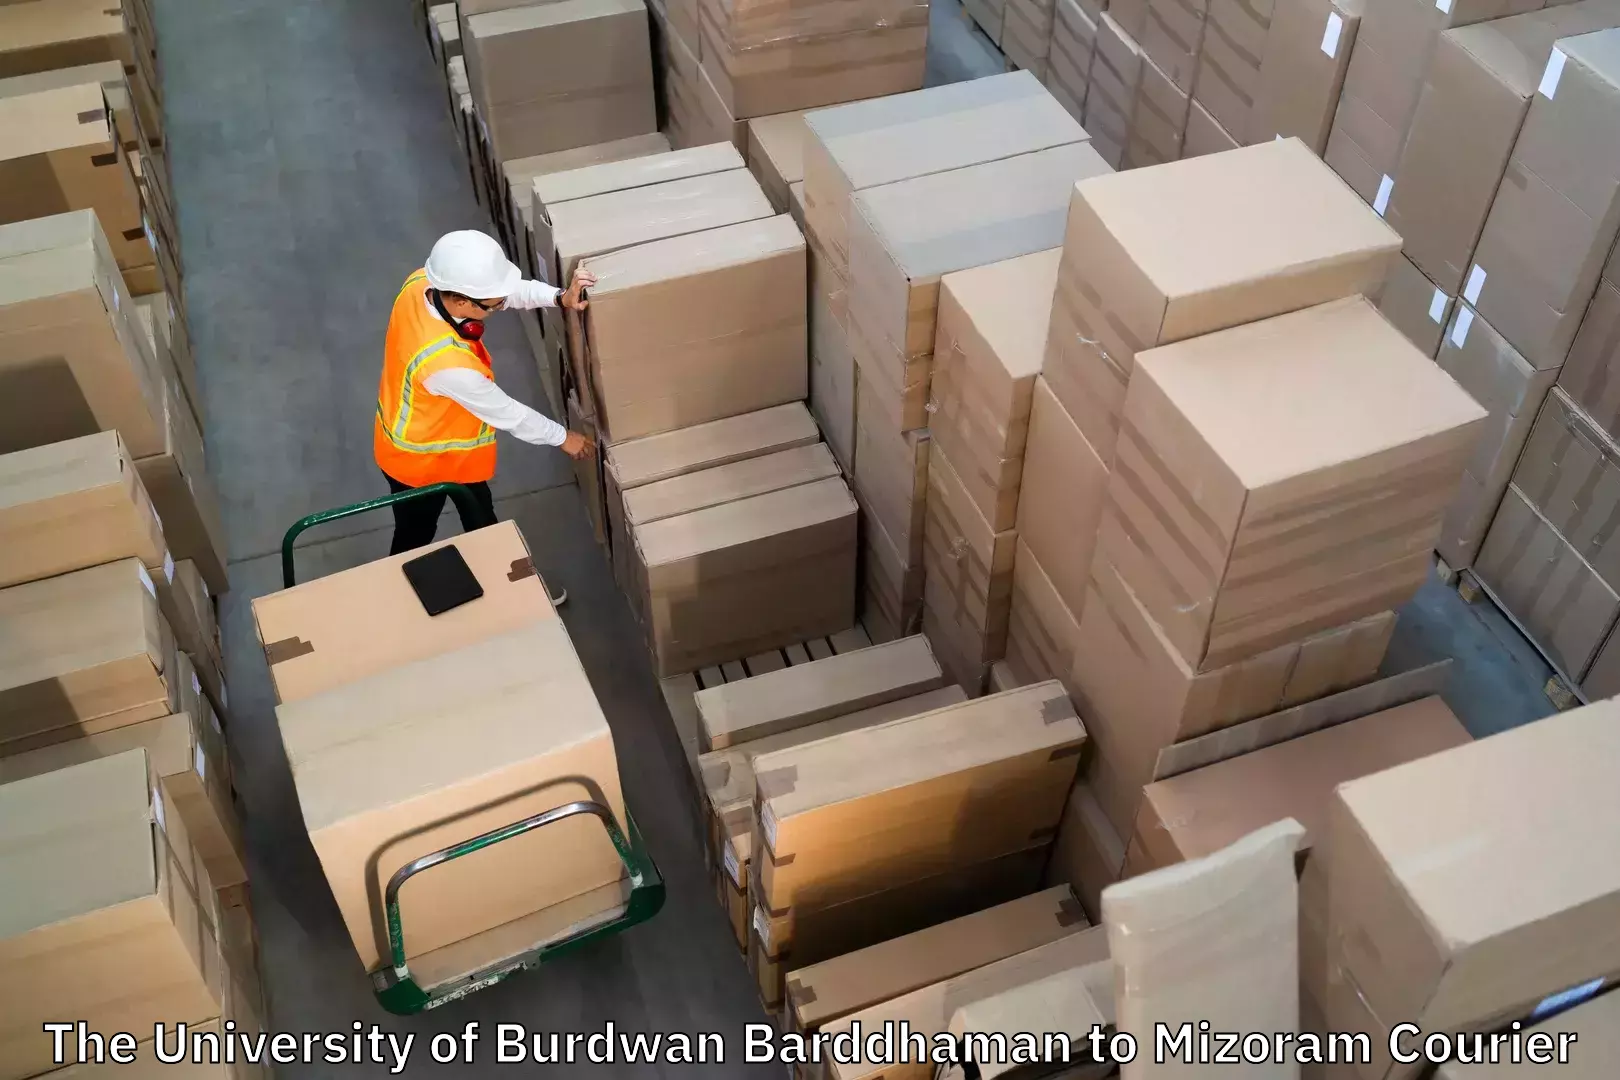 Baggage transport services The University of Burdwan Barddhaman to Darlawn